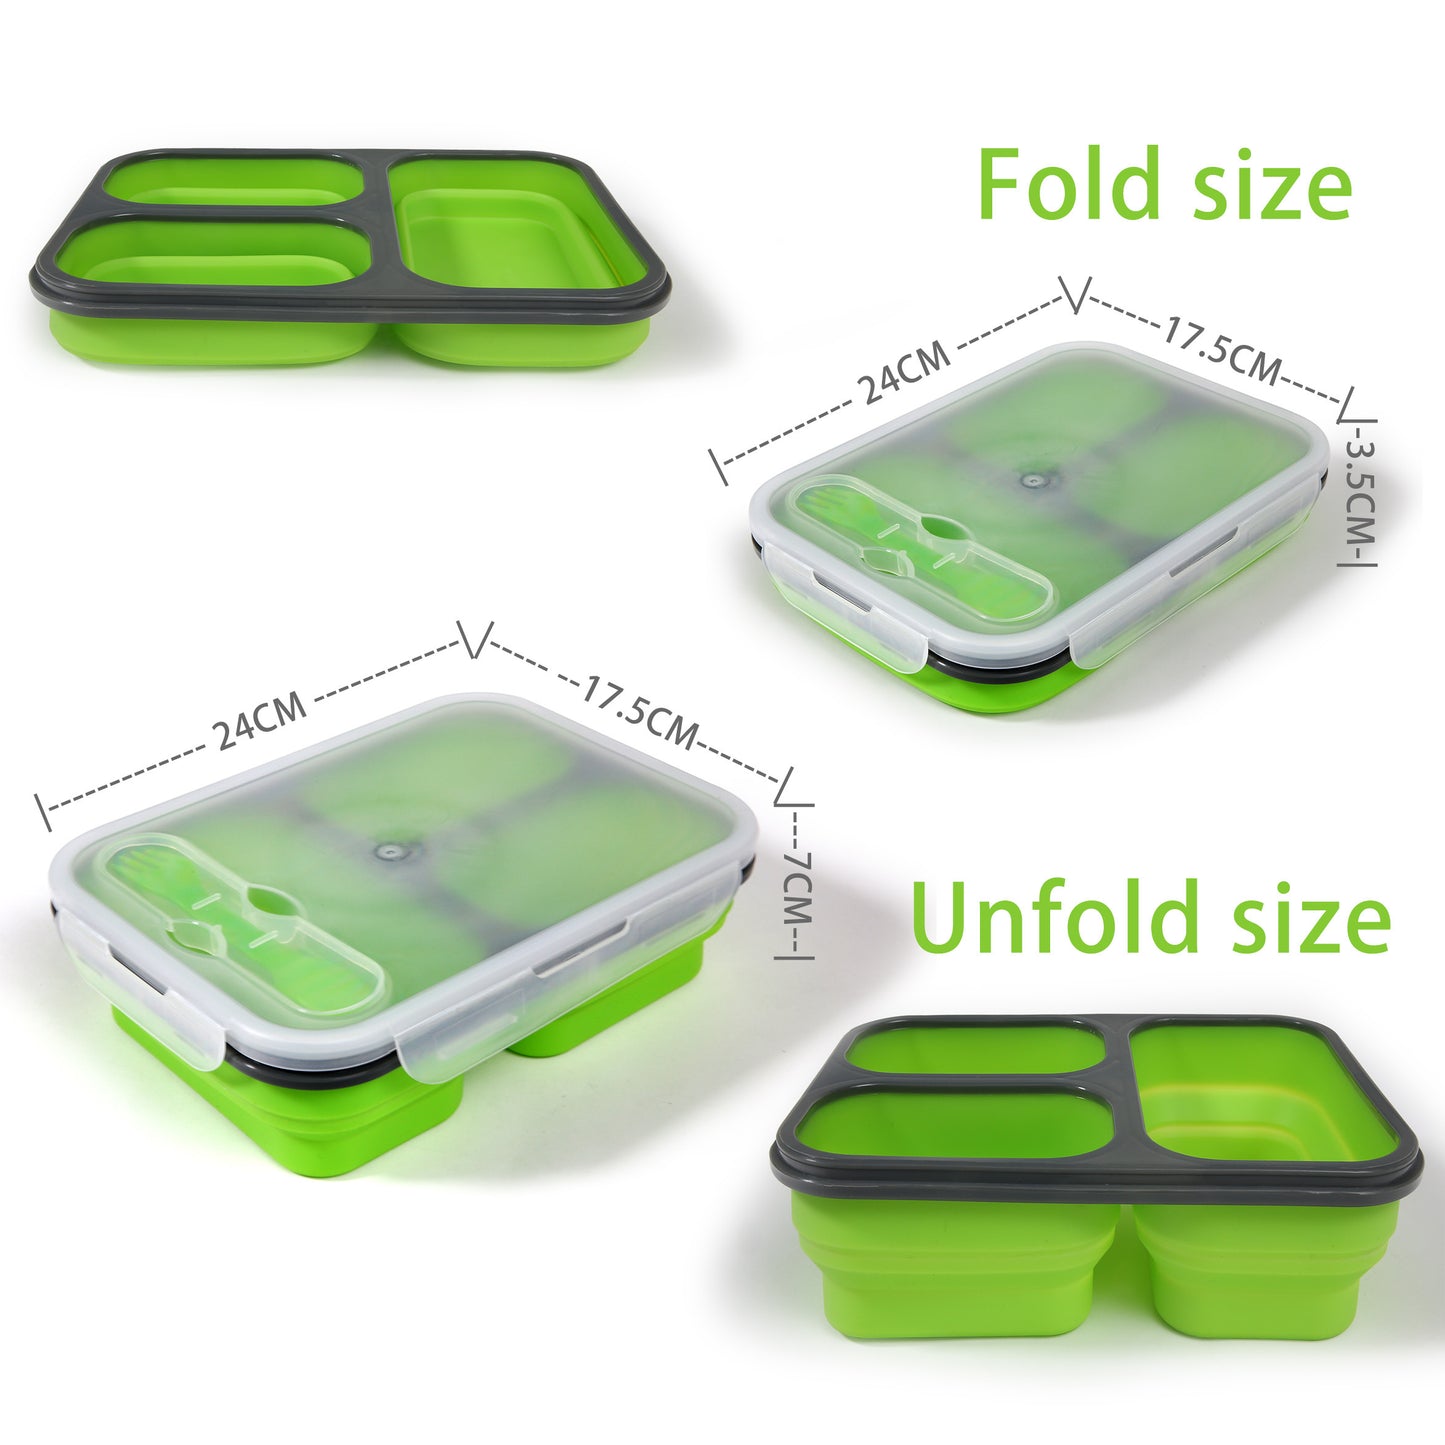 Exclusivo Mezcla Foldable Bento Lunch Box (1pcs) for Women Men With Spork & Lid BPA Free,Collapsible and Leakproof Space Saving Food Storage Containers with 3 Compartments - Green